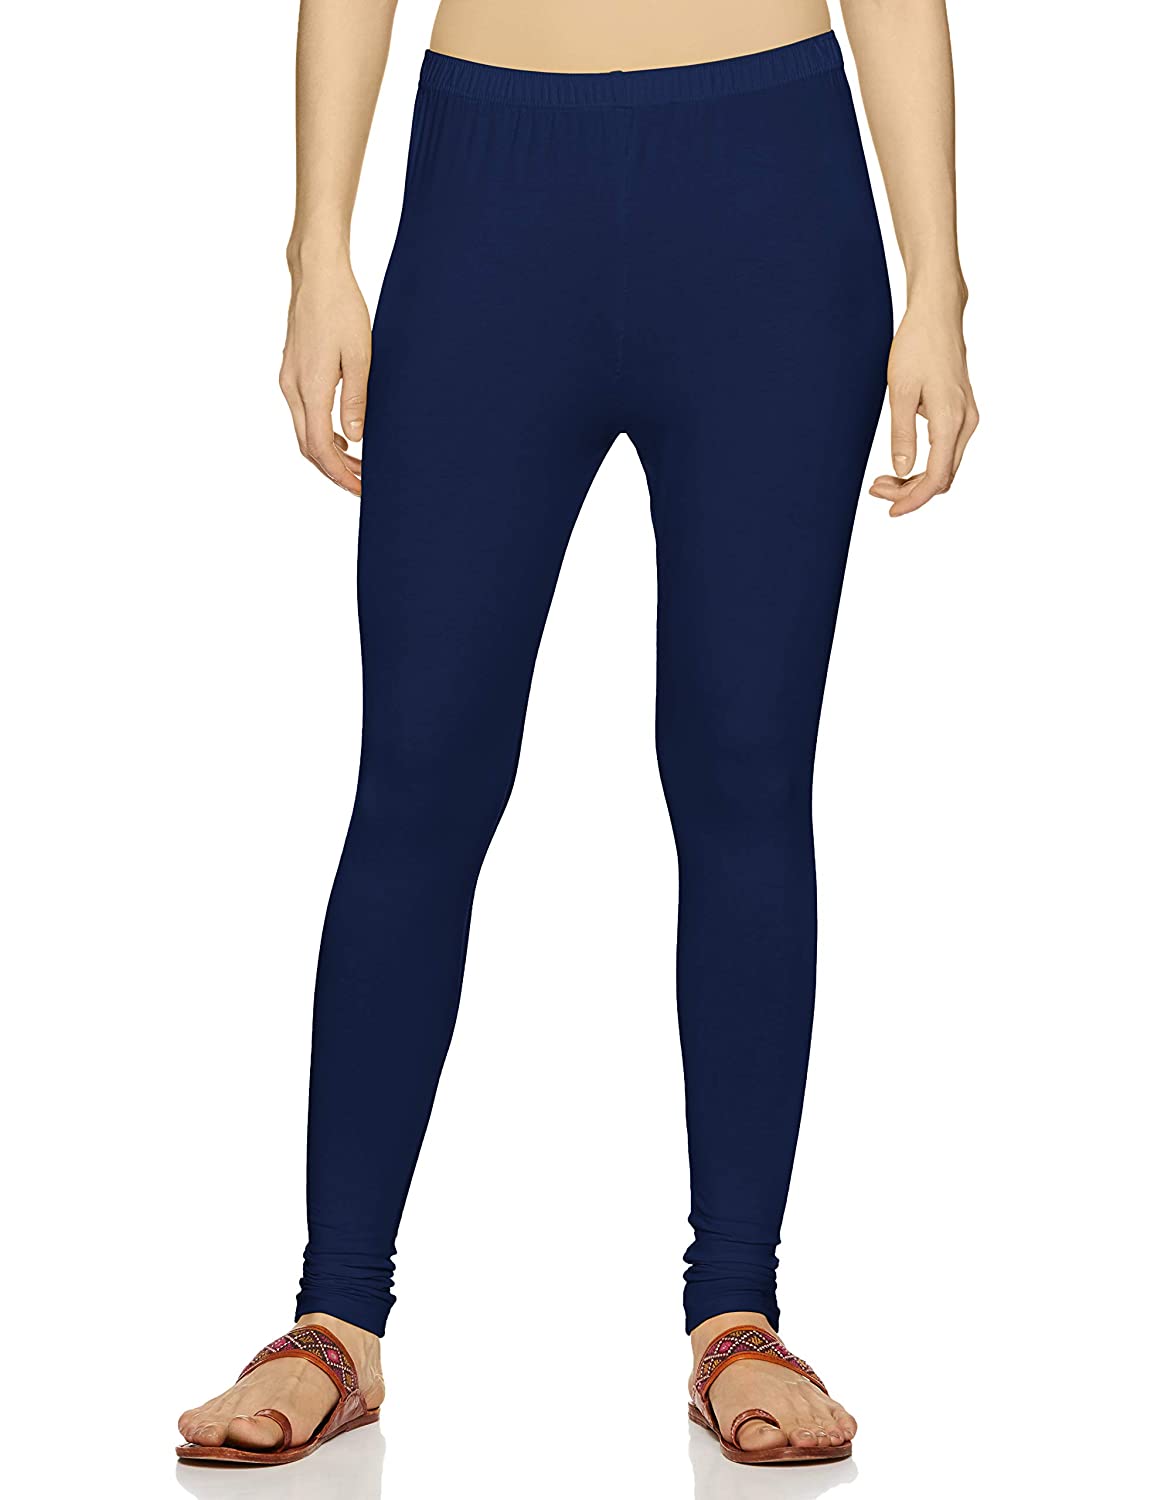 Buy Lux Lyra Women's Cotton Classic Fit Stretchable Ankle Length Leggings  (Navy Blue, Free Size) at